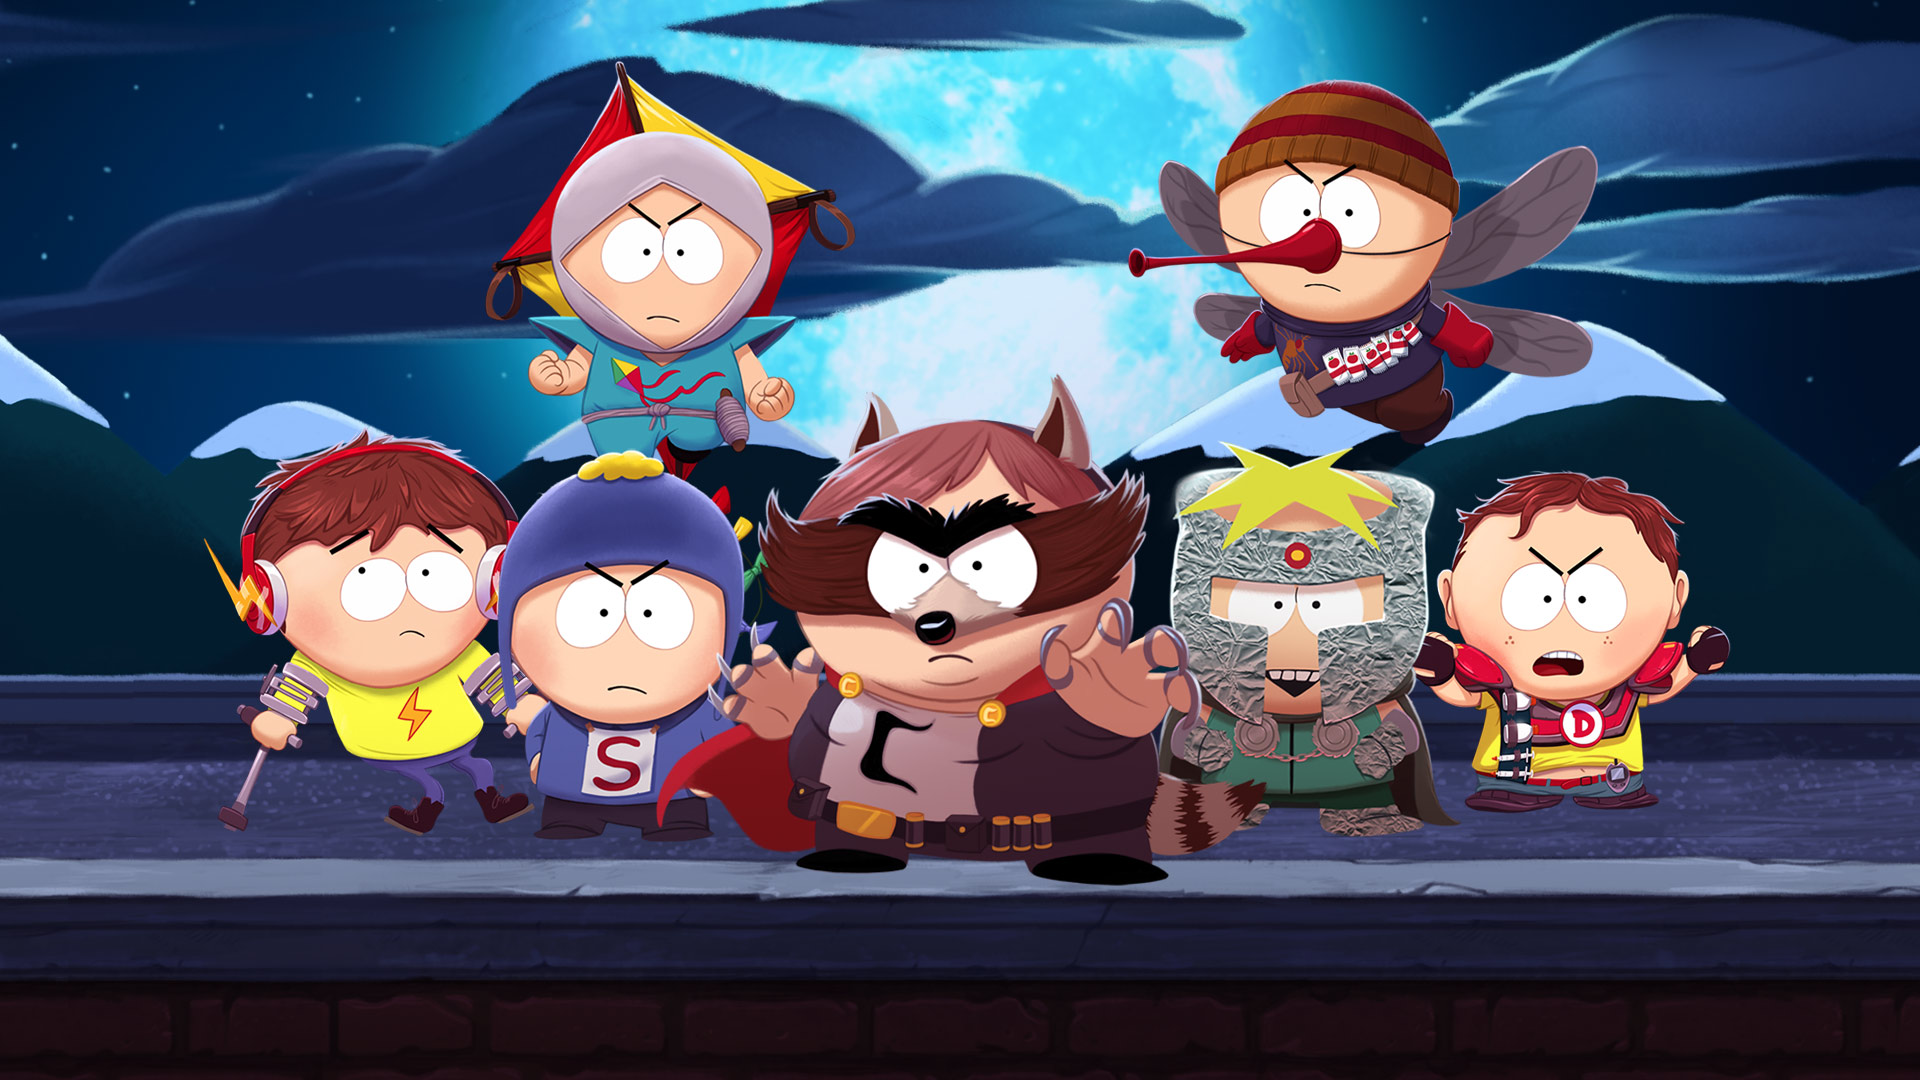 Steam Card Exchange Showcase South Park The Fractured But Whole